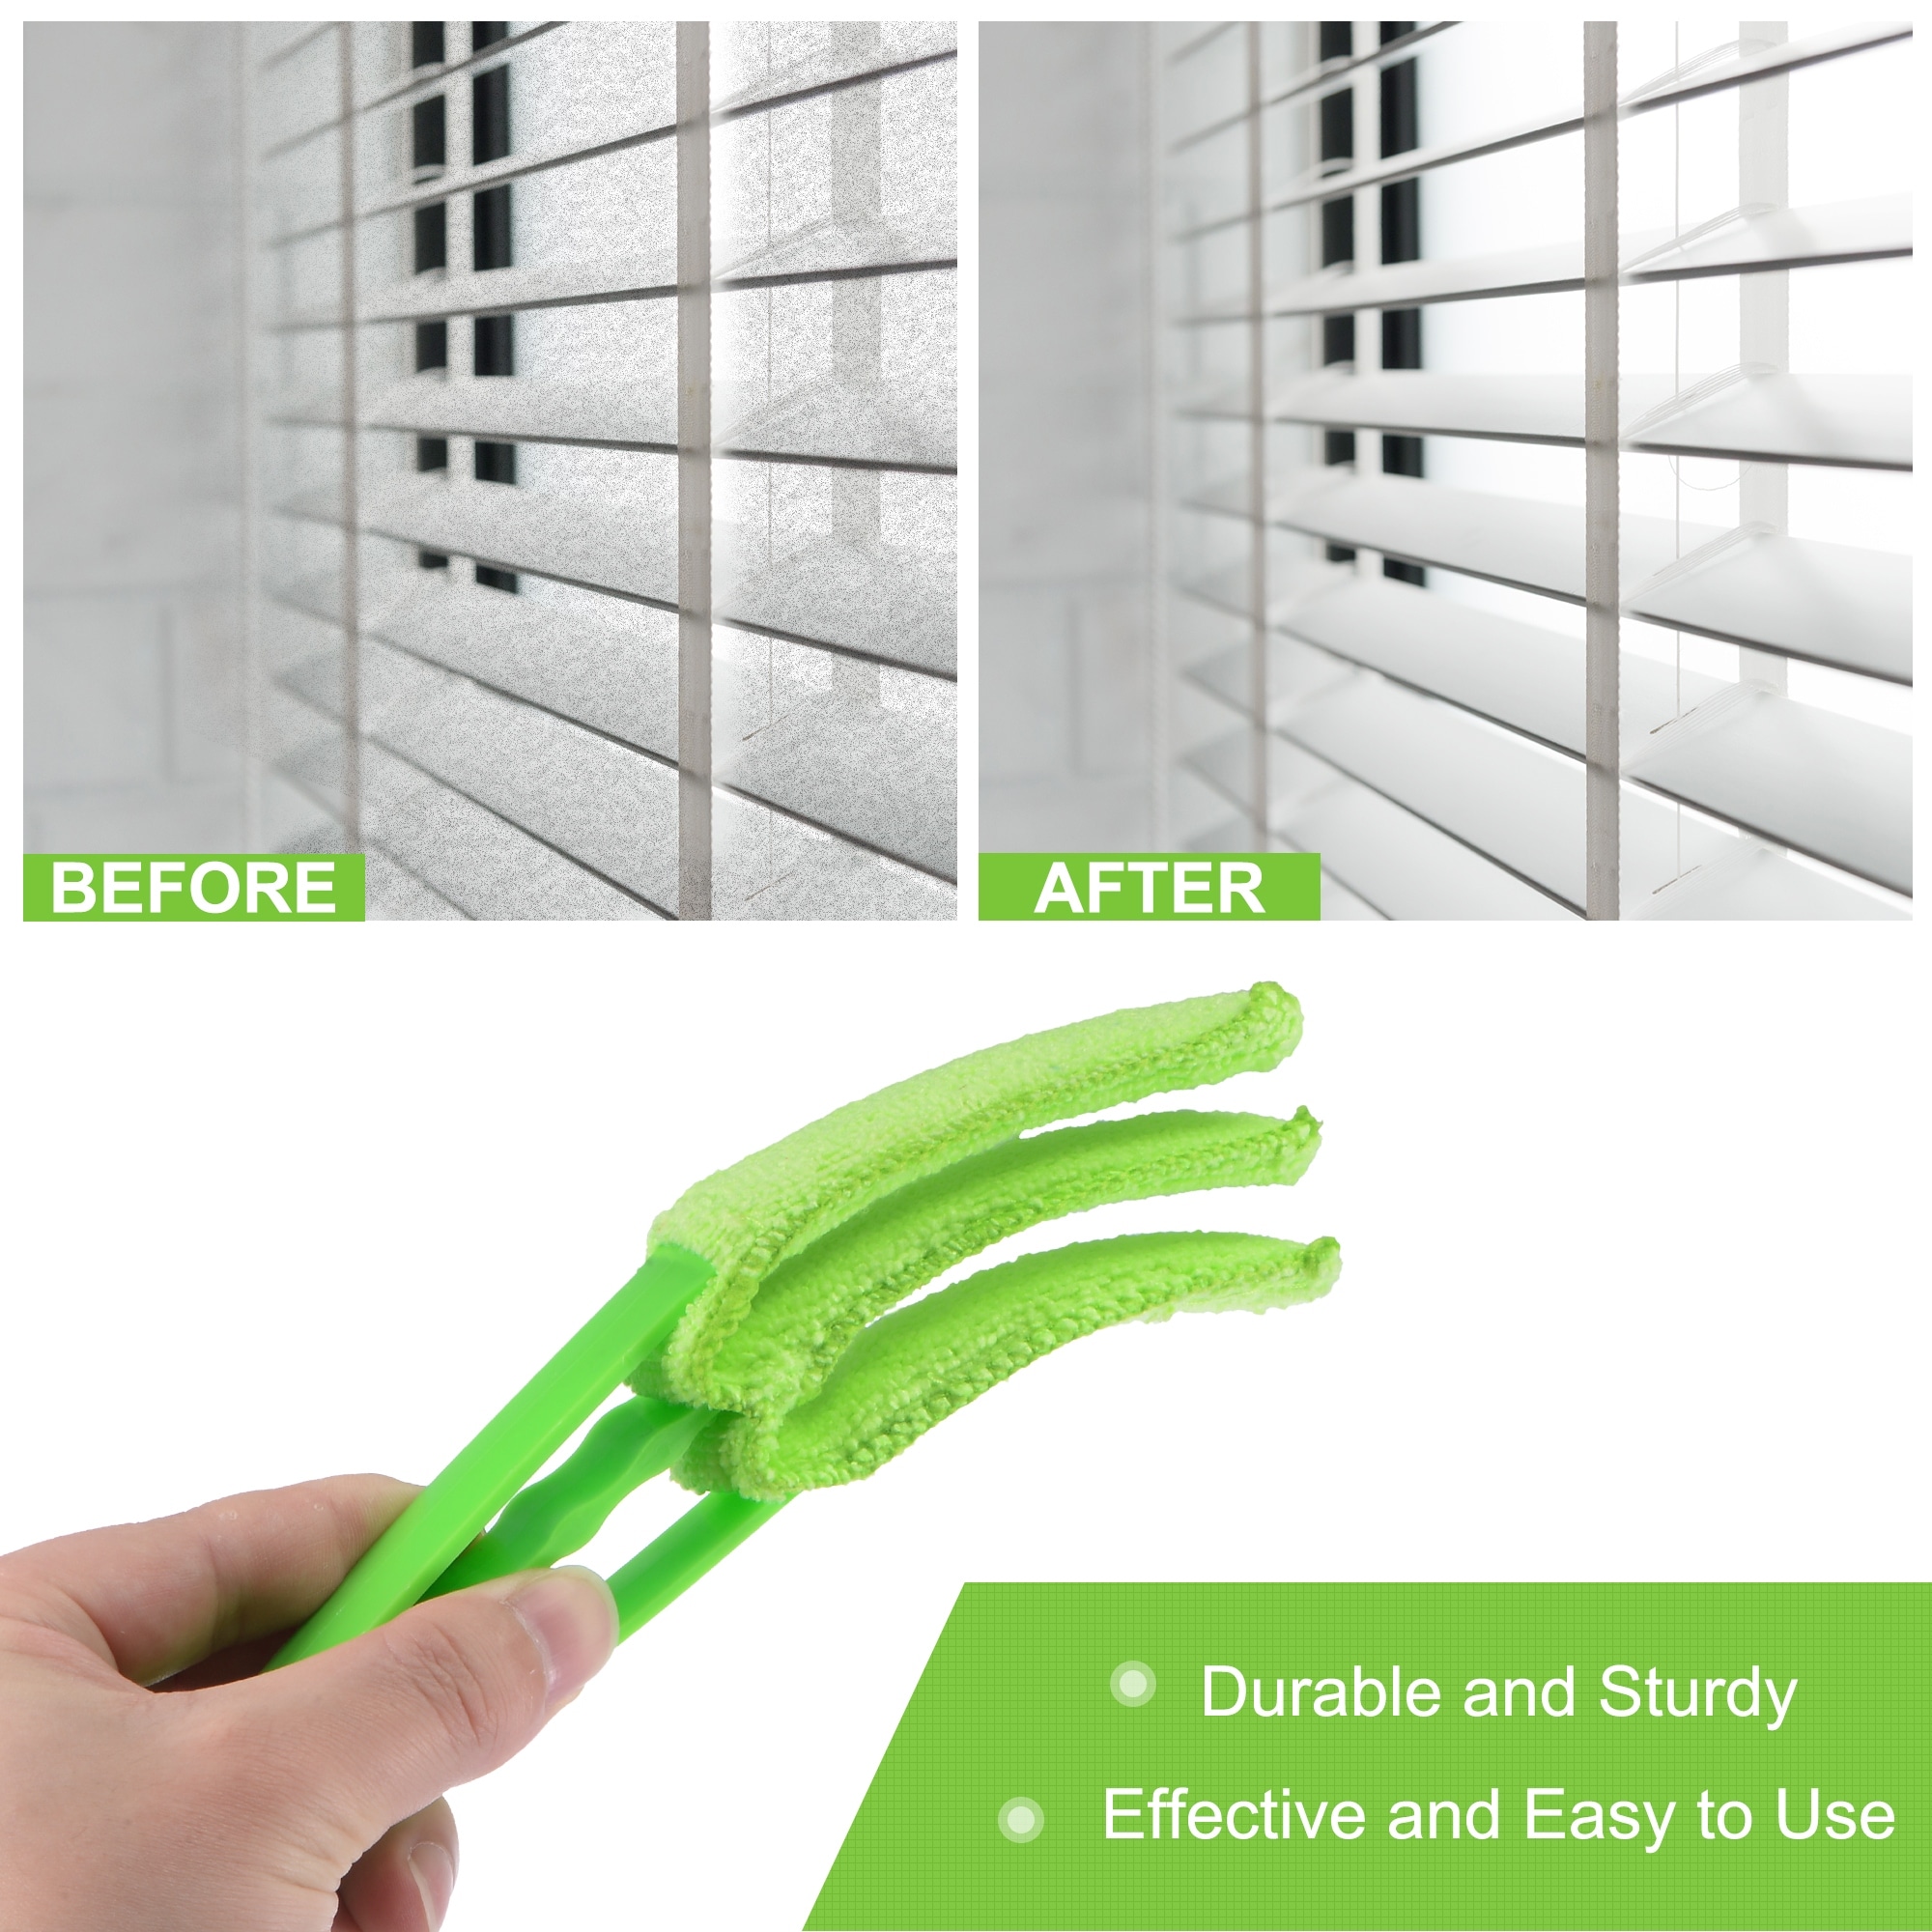 https://ak1.ostkcdn.com/images/products/is/images/direct/b2f5306405516a80af8ce35c6b645101c4fe2bde/6Pcs-Blind-Duster-Brush-Groove-Gap-Cleaning-Tool-with-3-Extra-Microfiber-Sleeves.jpg